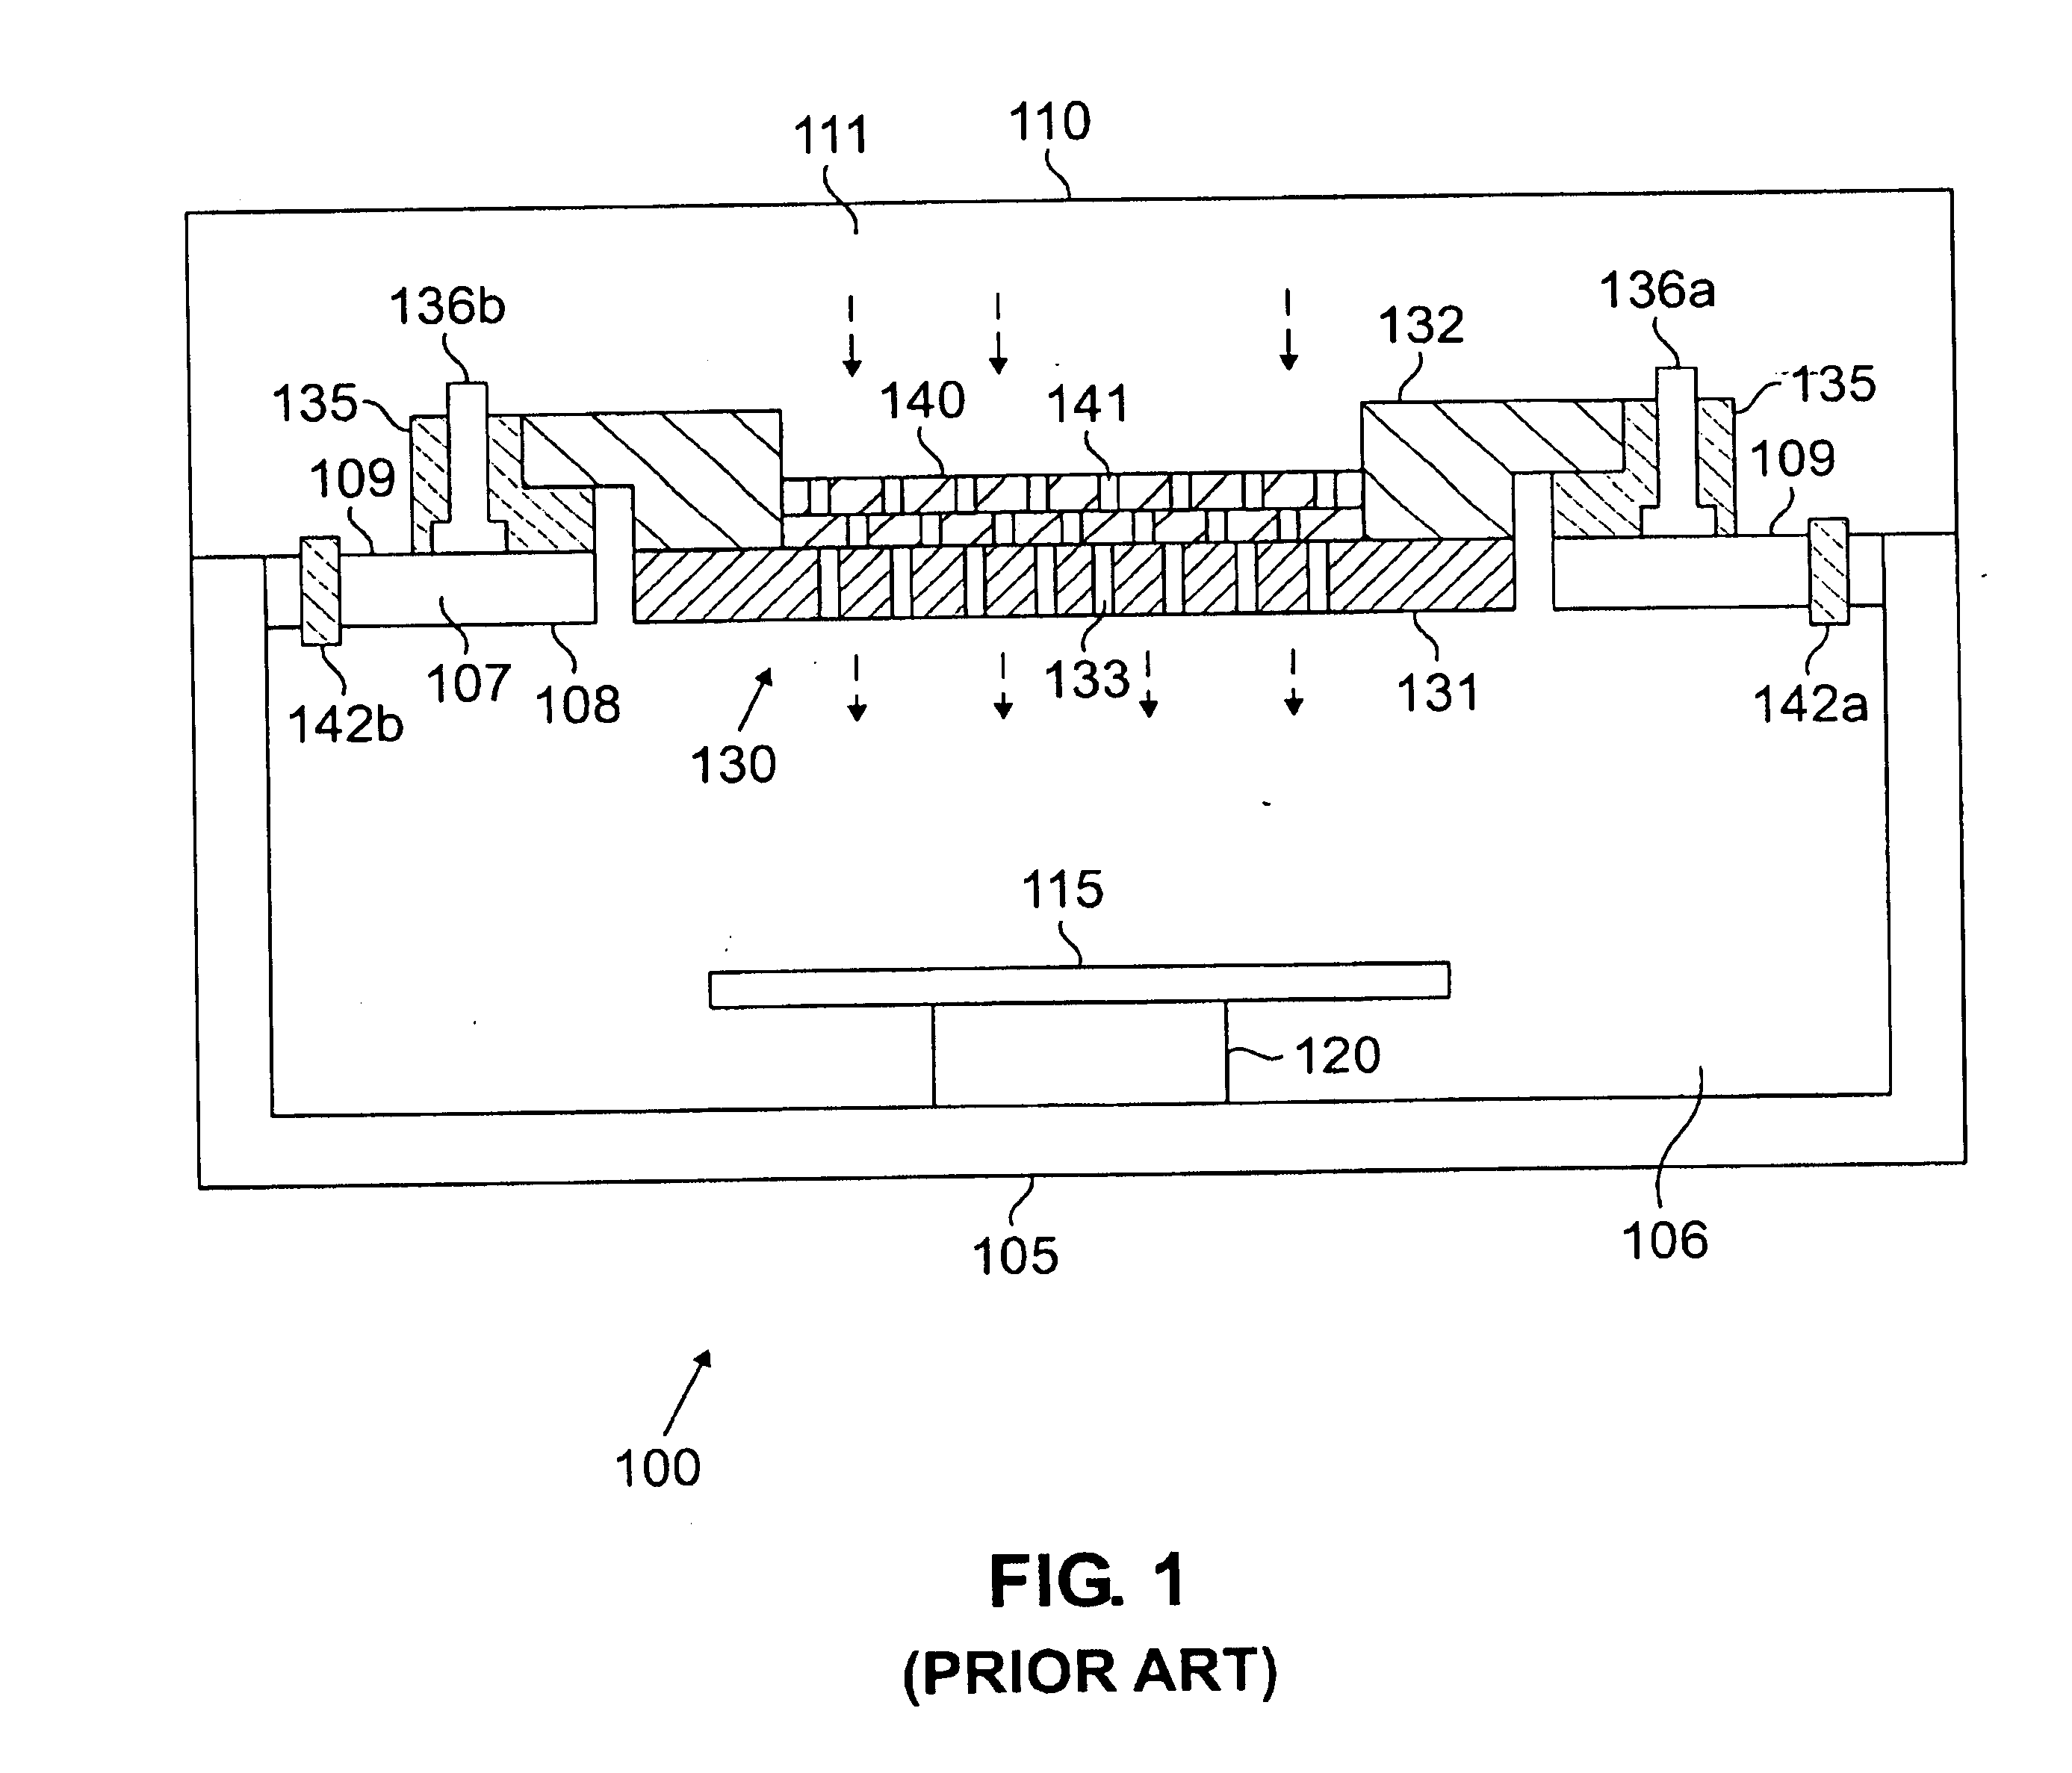 Plasma reaction chamber and captive silicon electrode plate for processing semiconductor wafers